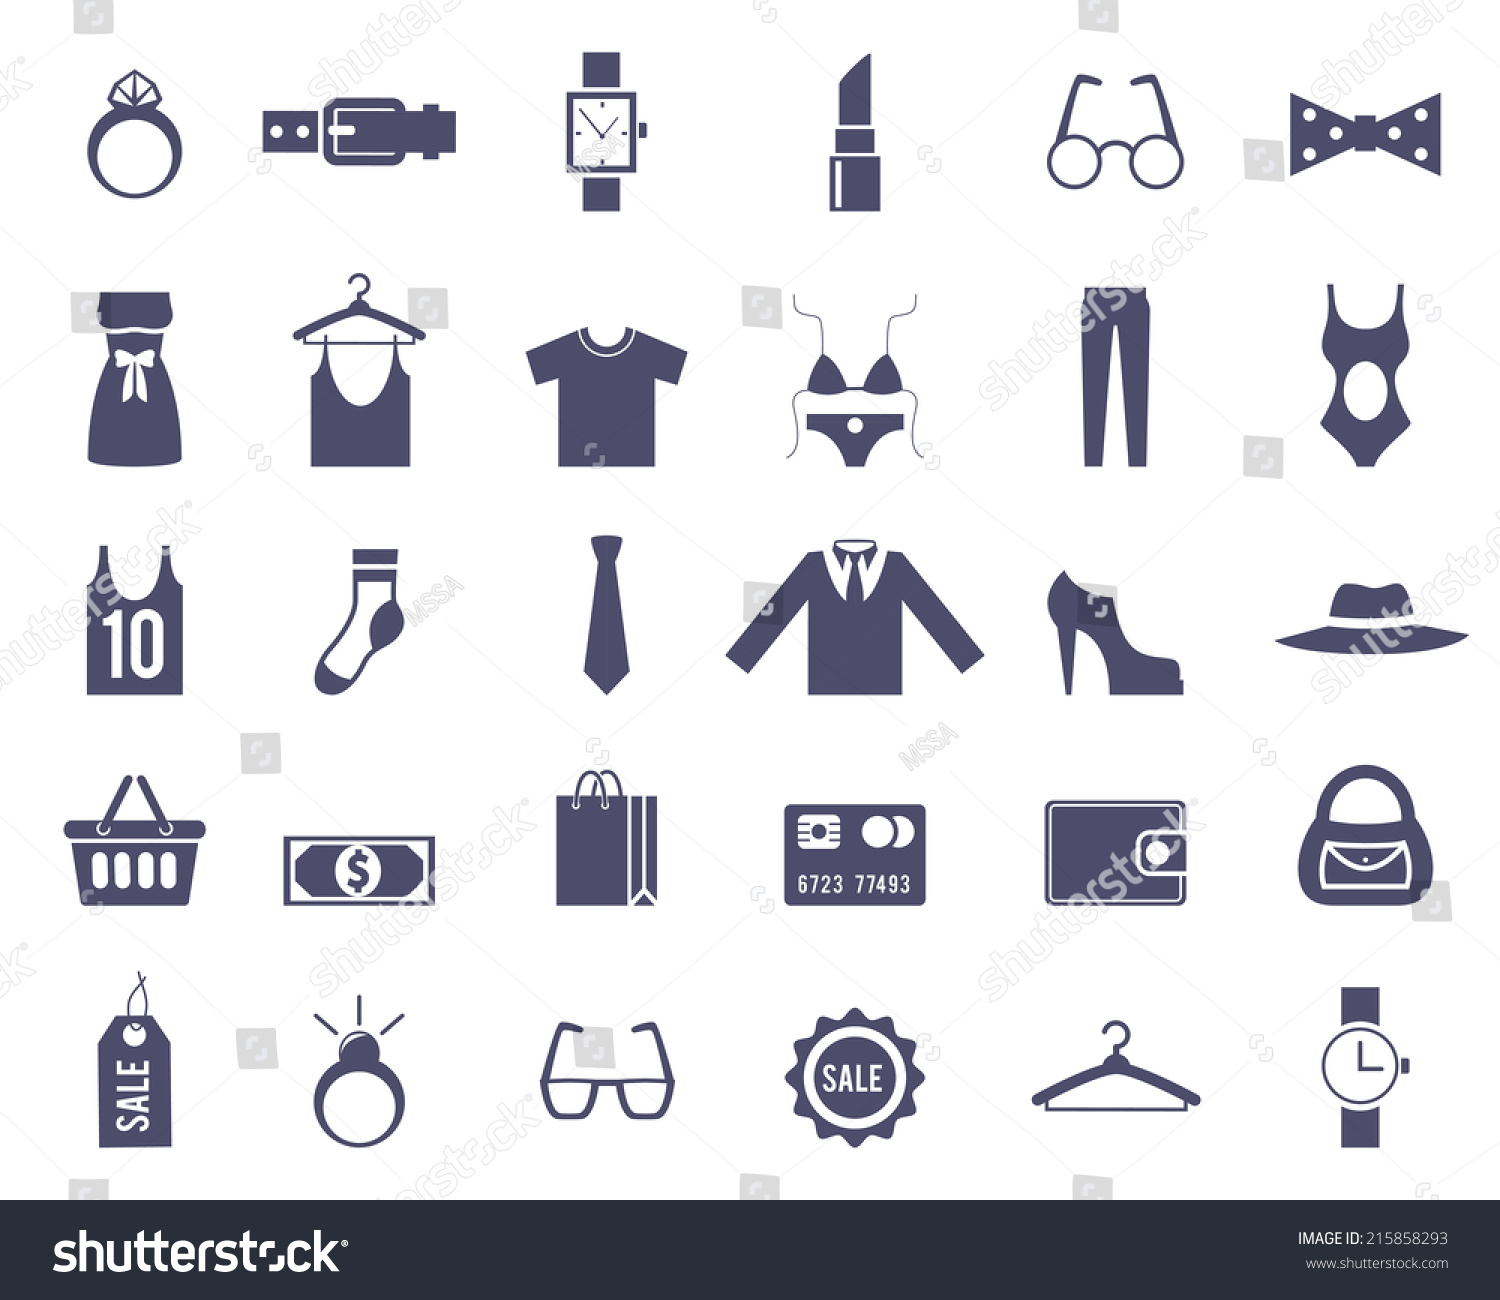 Clothing And Accessories Themed Graphics On White Background Stock ...